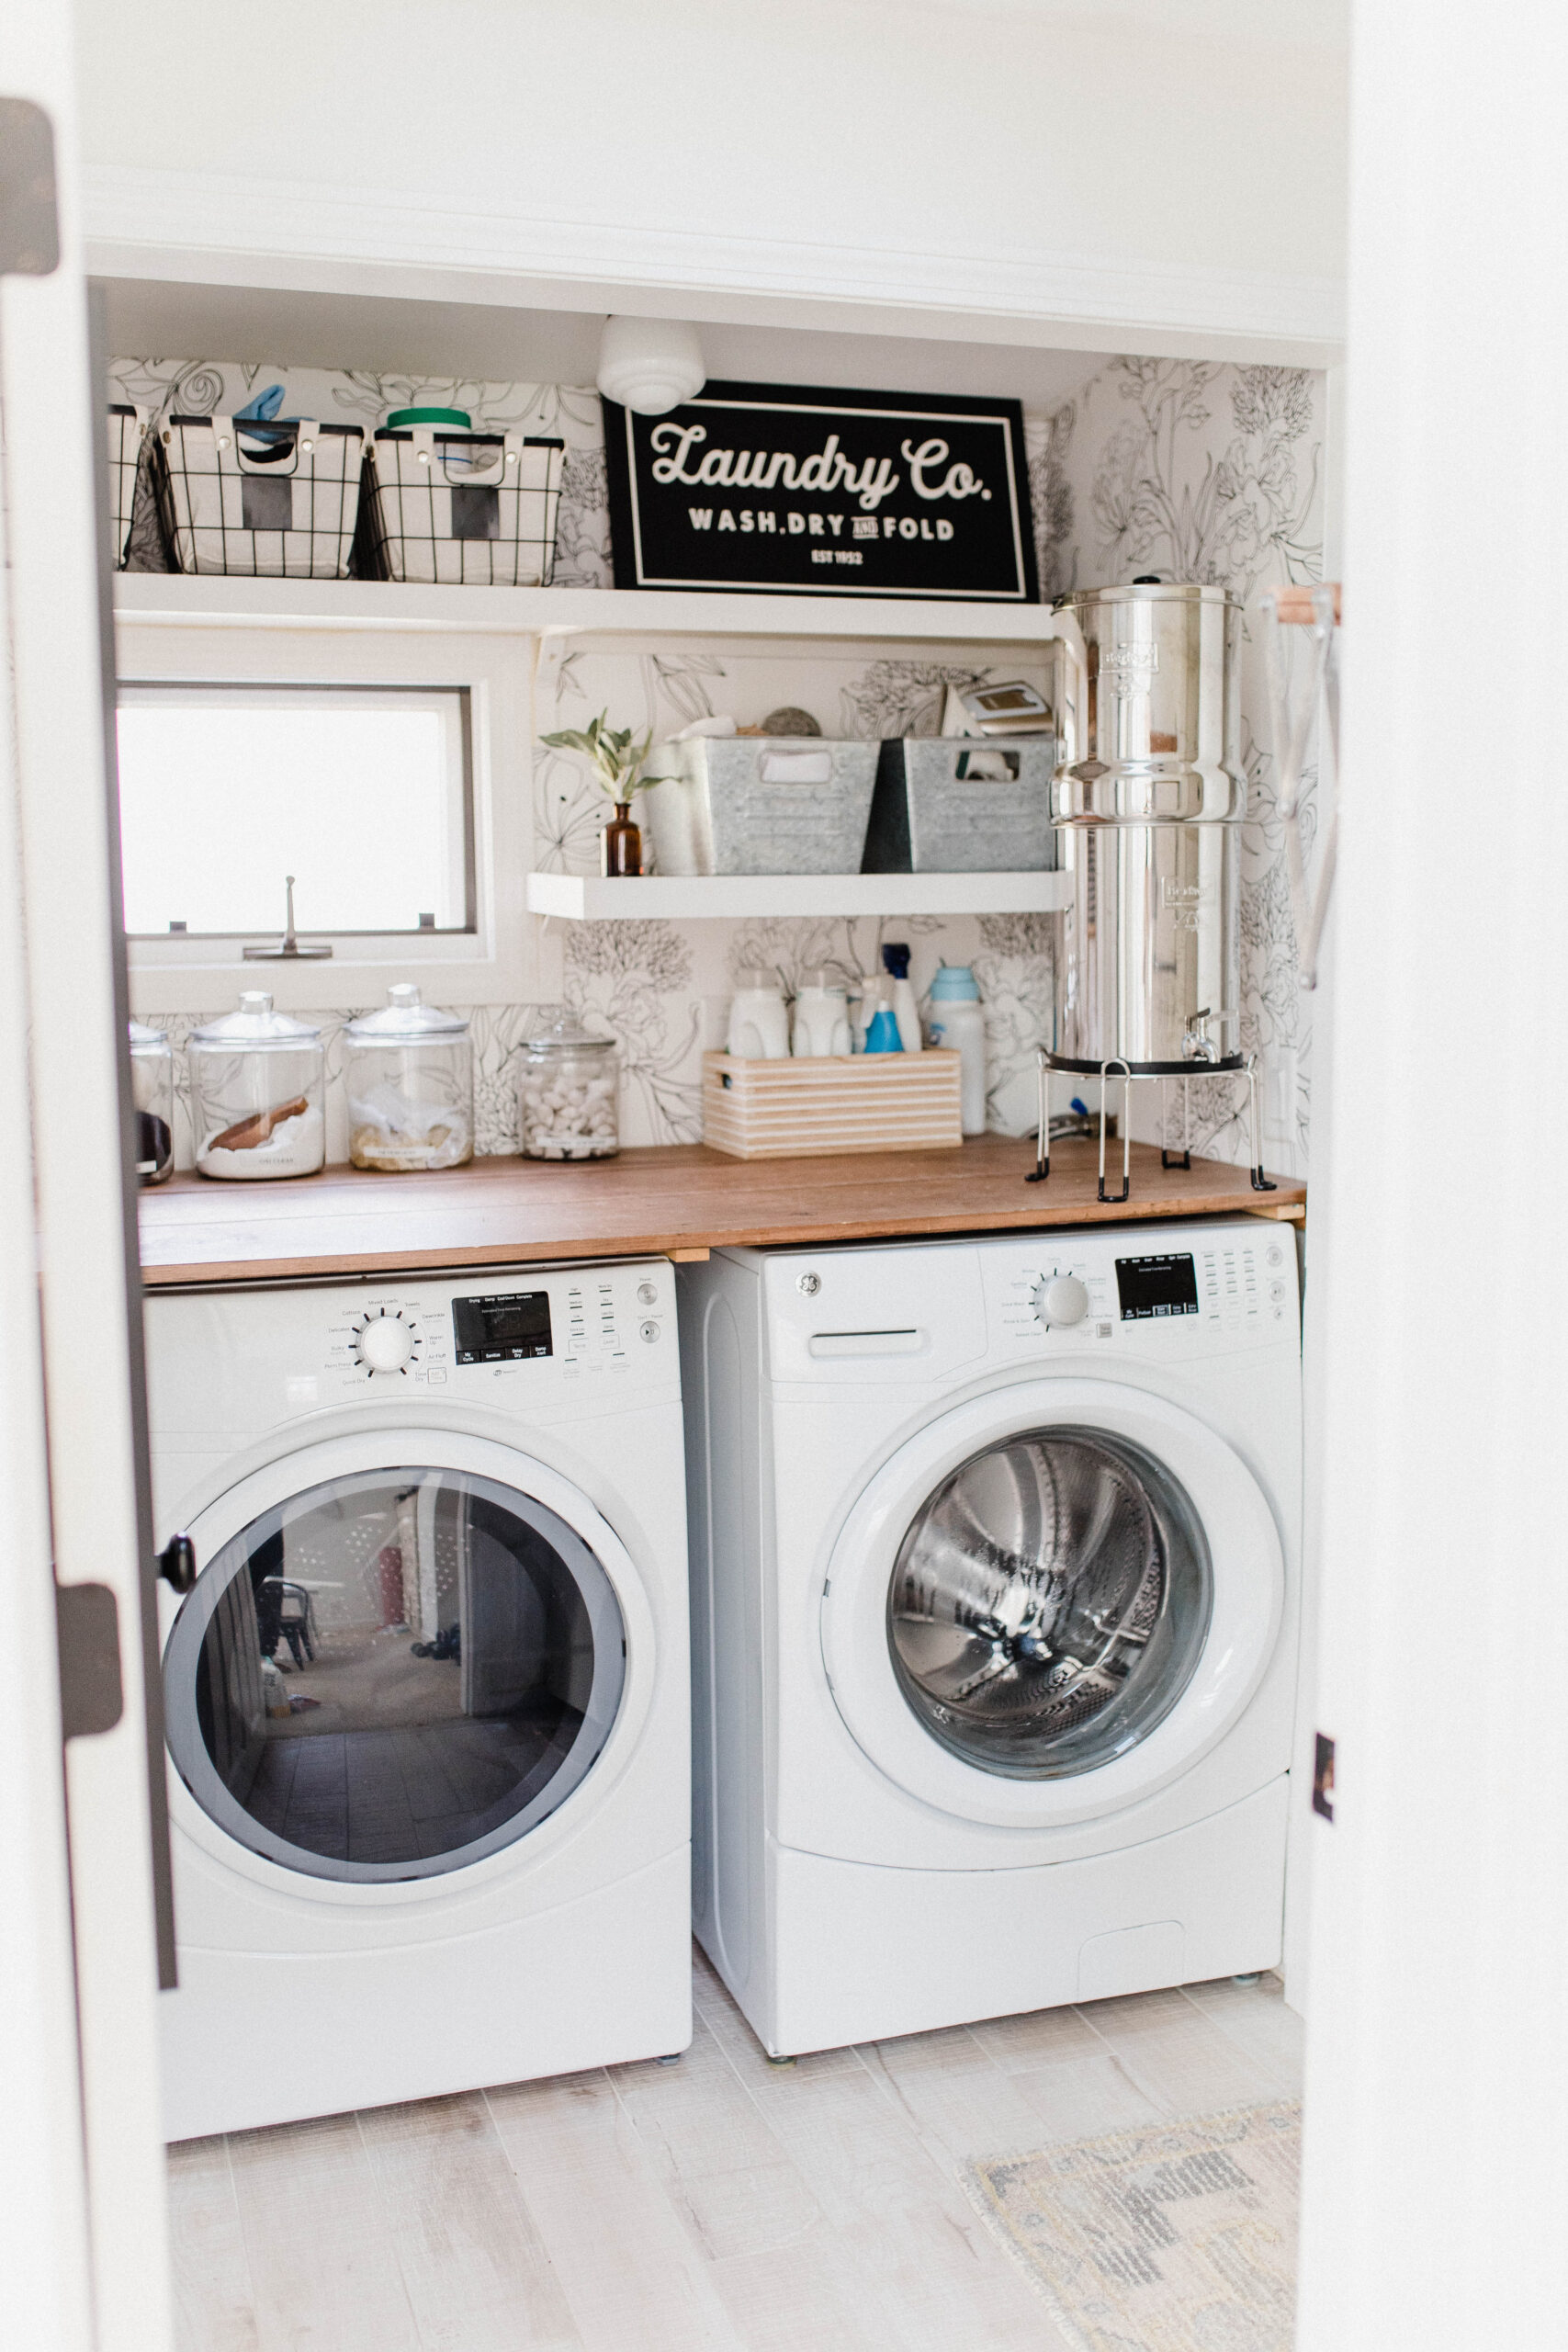 Connecticut life and style blogger Lauren McBride shares her laundry room, the small DIY projects that made a big impact, and sources.